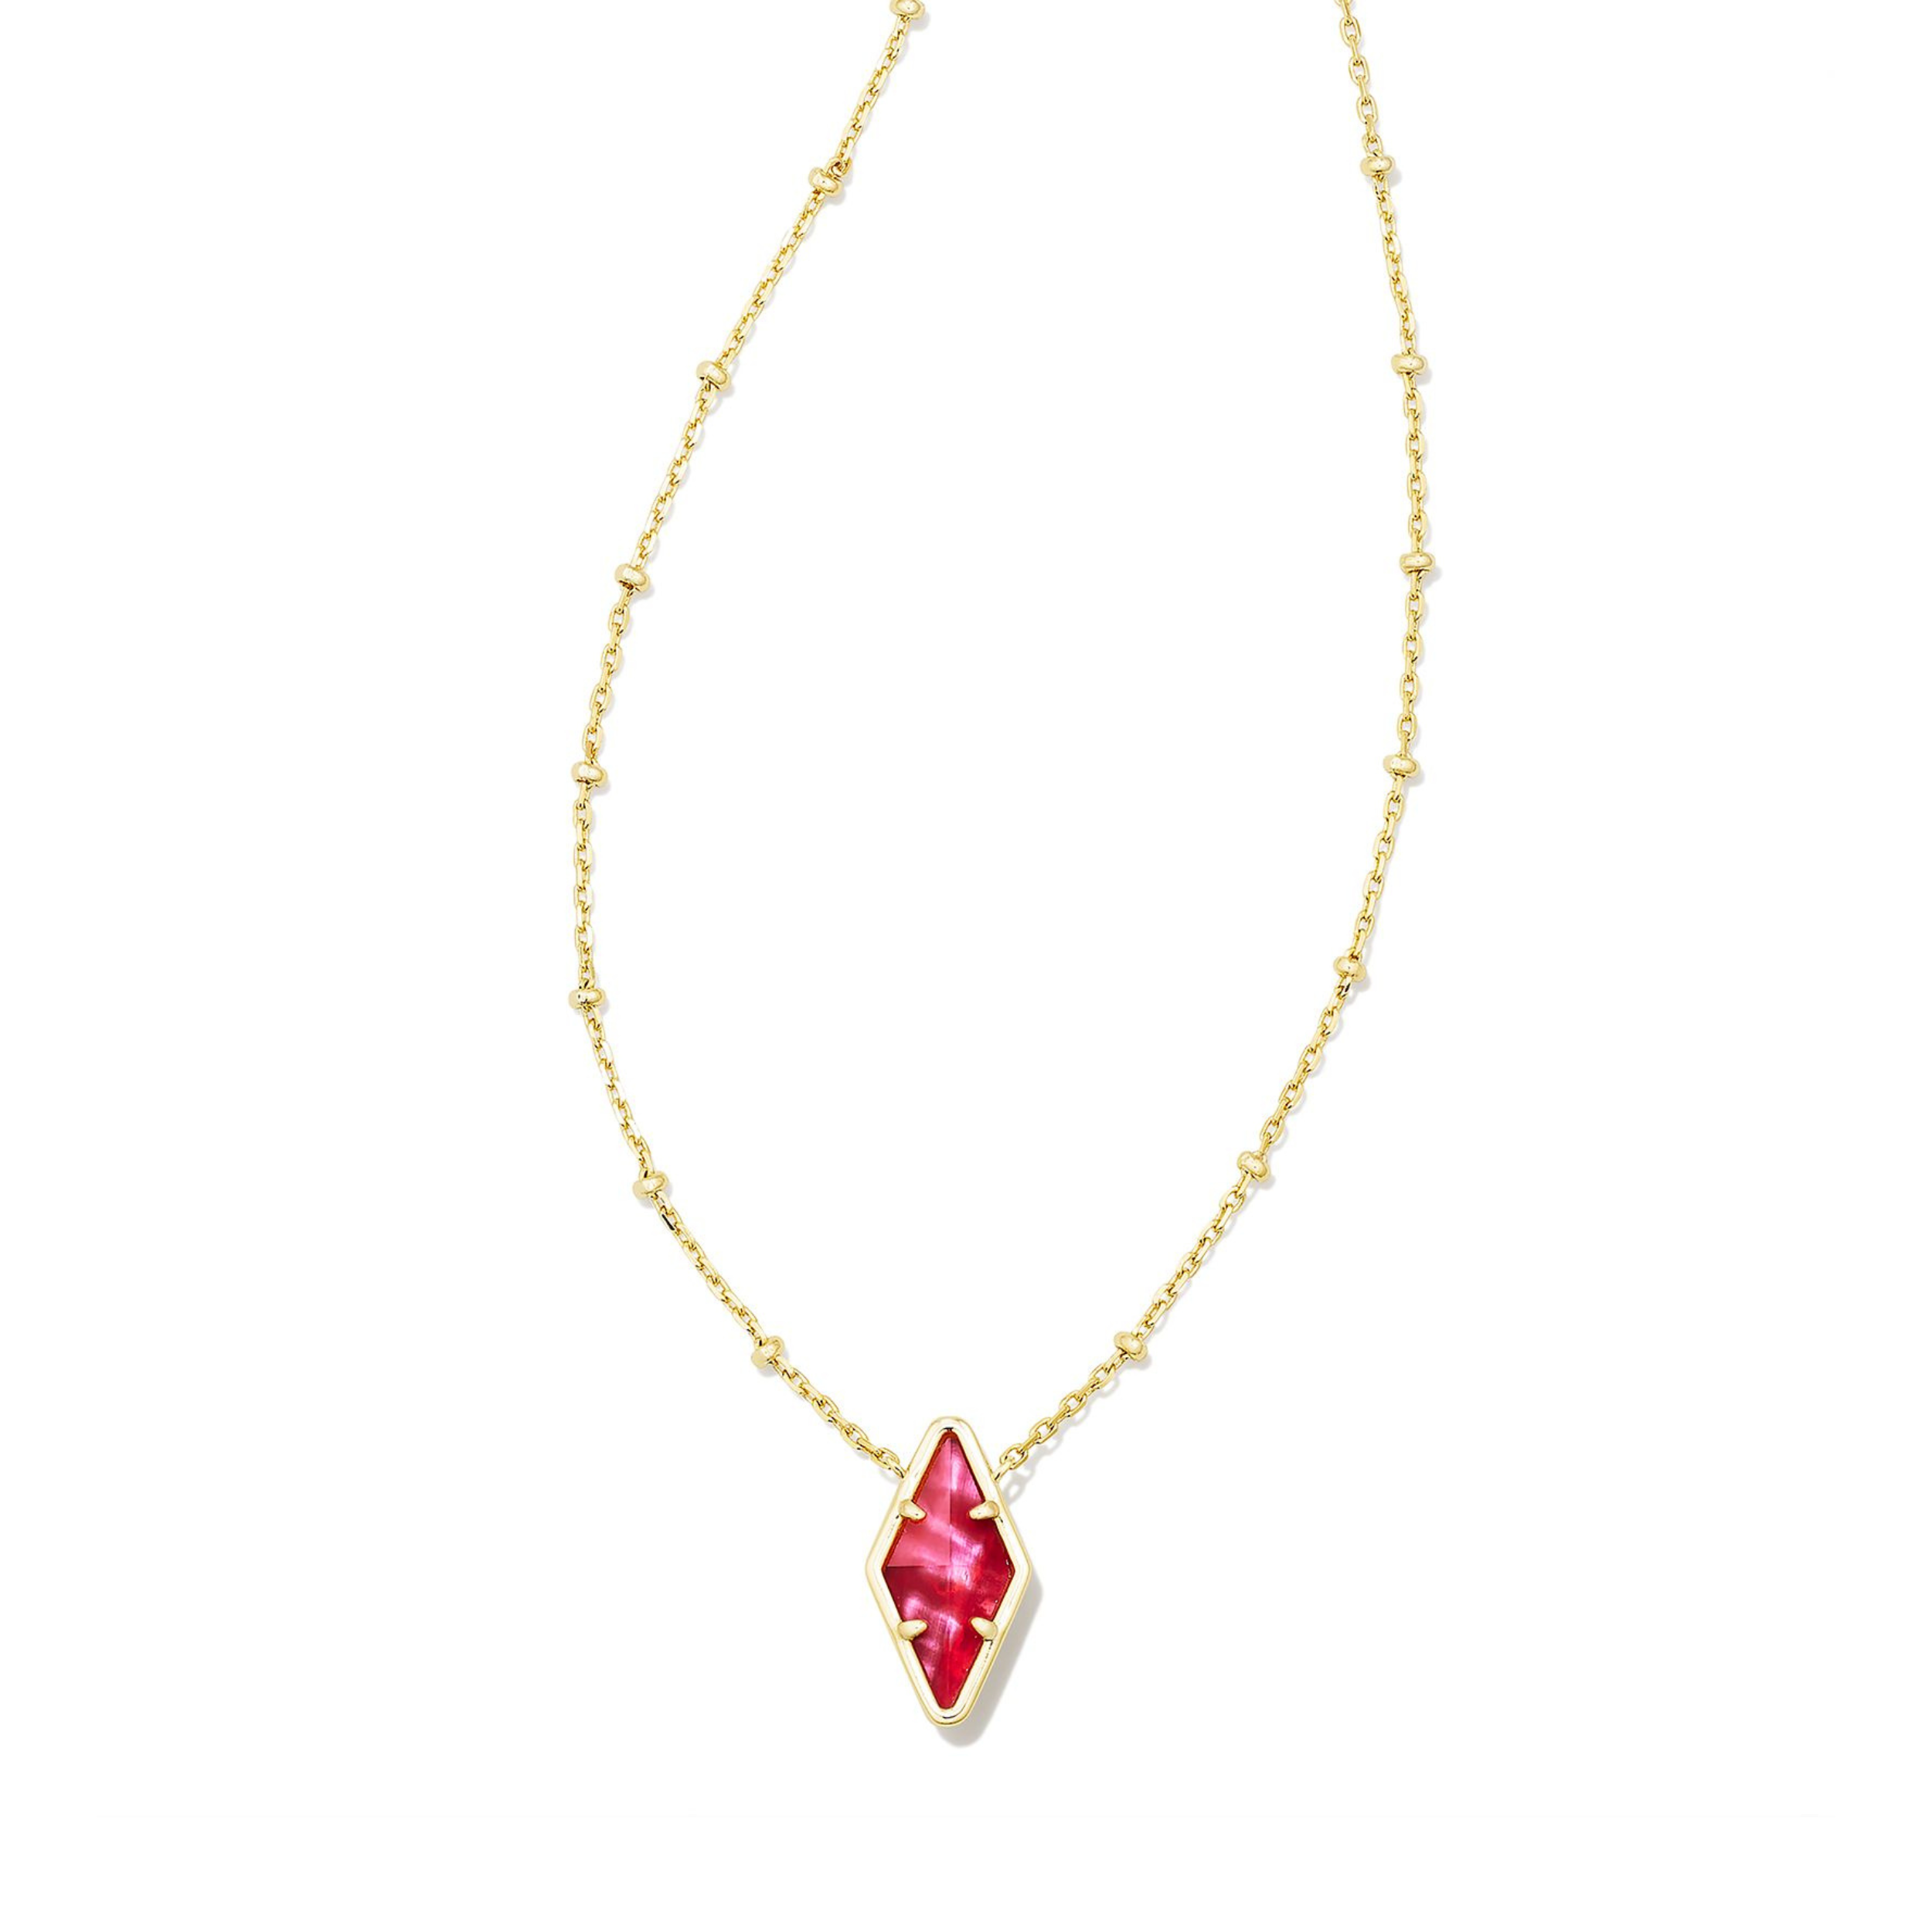 Gold necklace with diamond shaped pendant in raspberry illusion pictured on a white background.